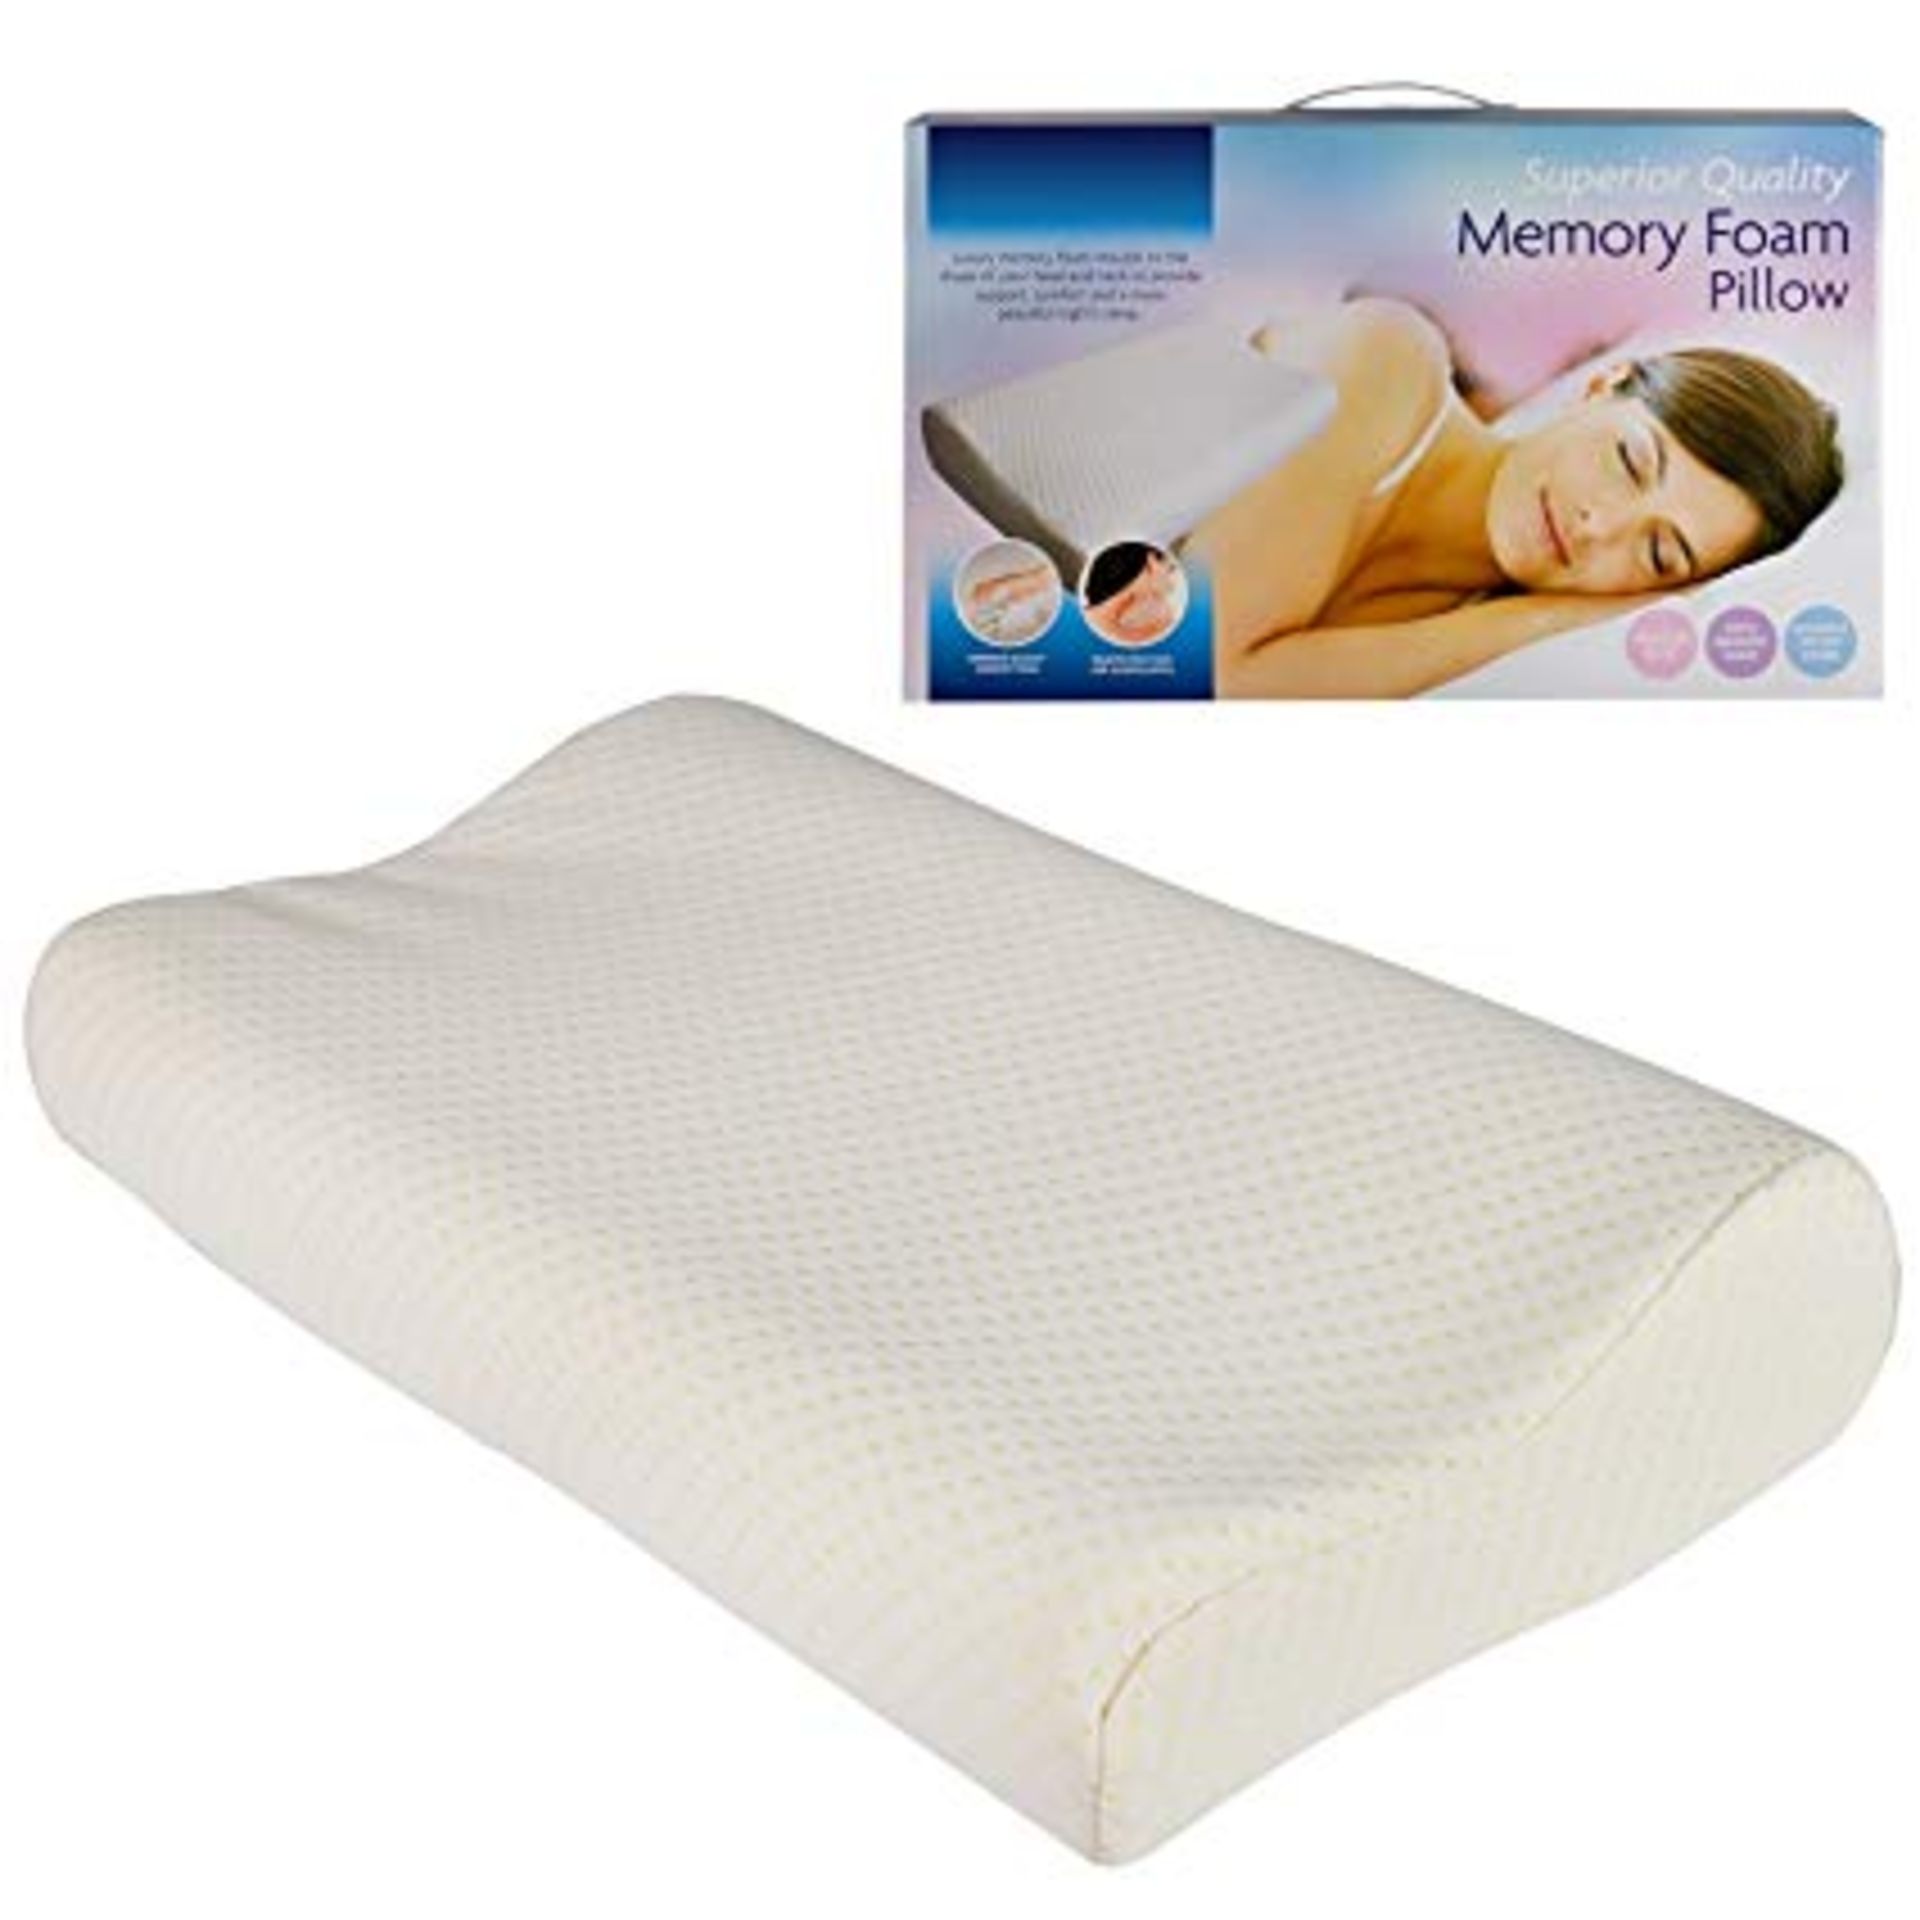 V Brand New Memory Foam Pillow - Superior Quality - Washable Zip Cover - Pressure Relief - ISP £19.